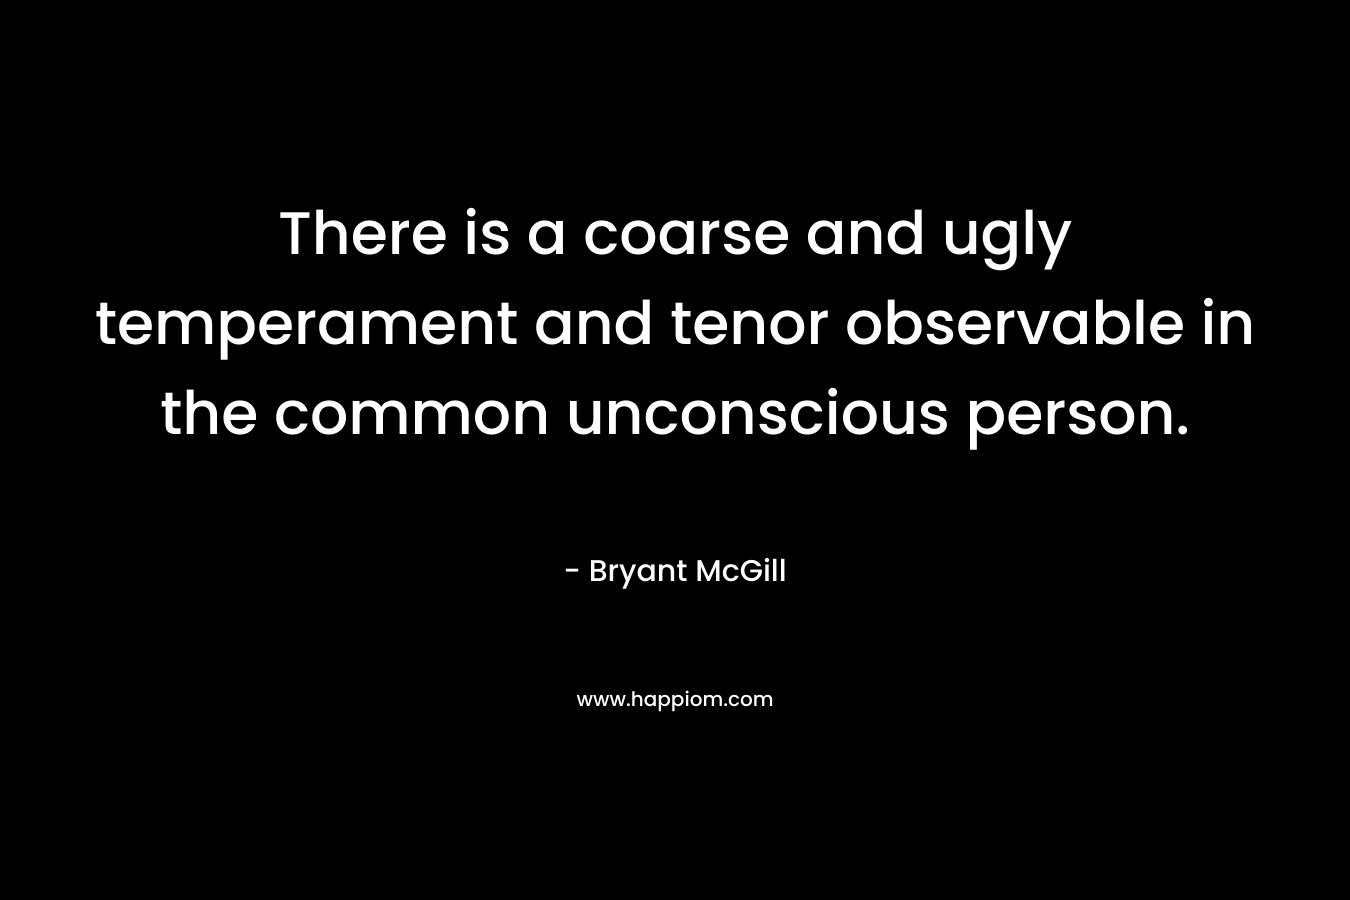 There is a coarse and ugly temperament and tenor observable in the common unconscious person. – Bryant McGill